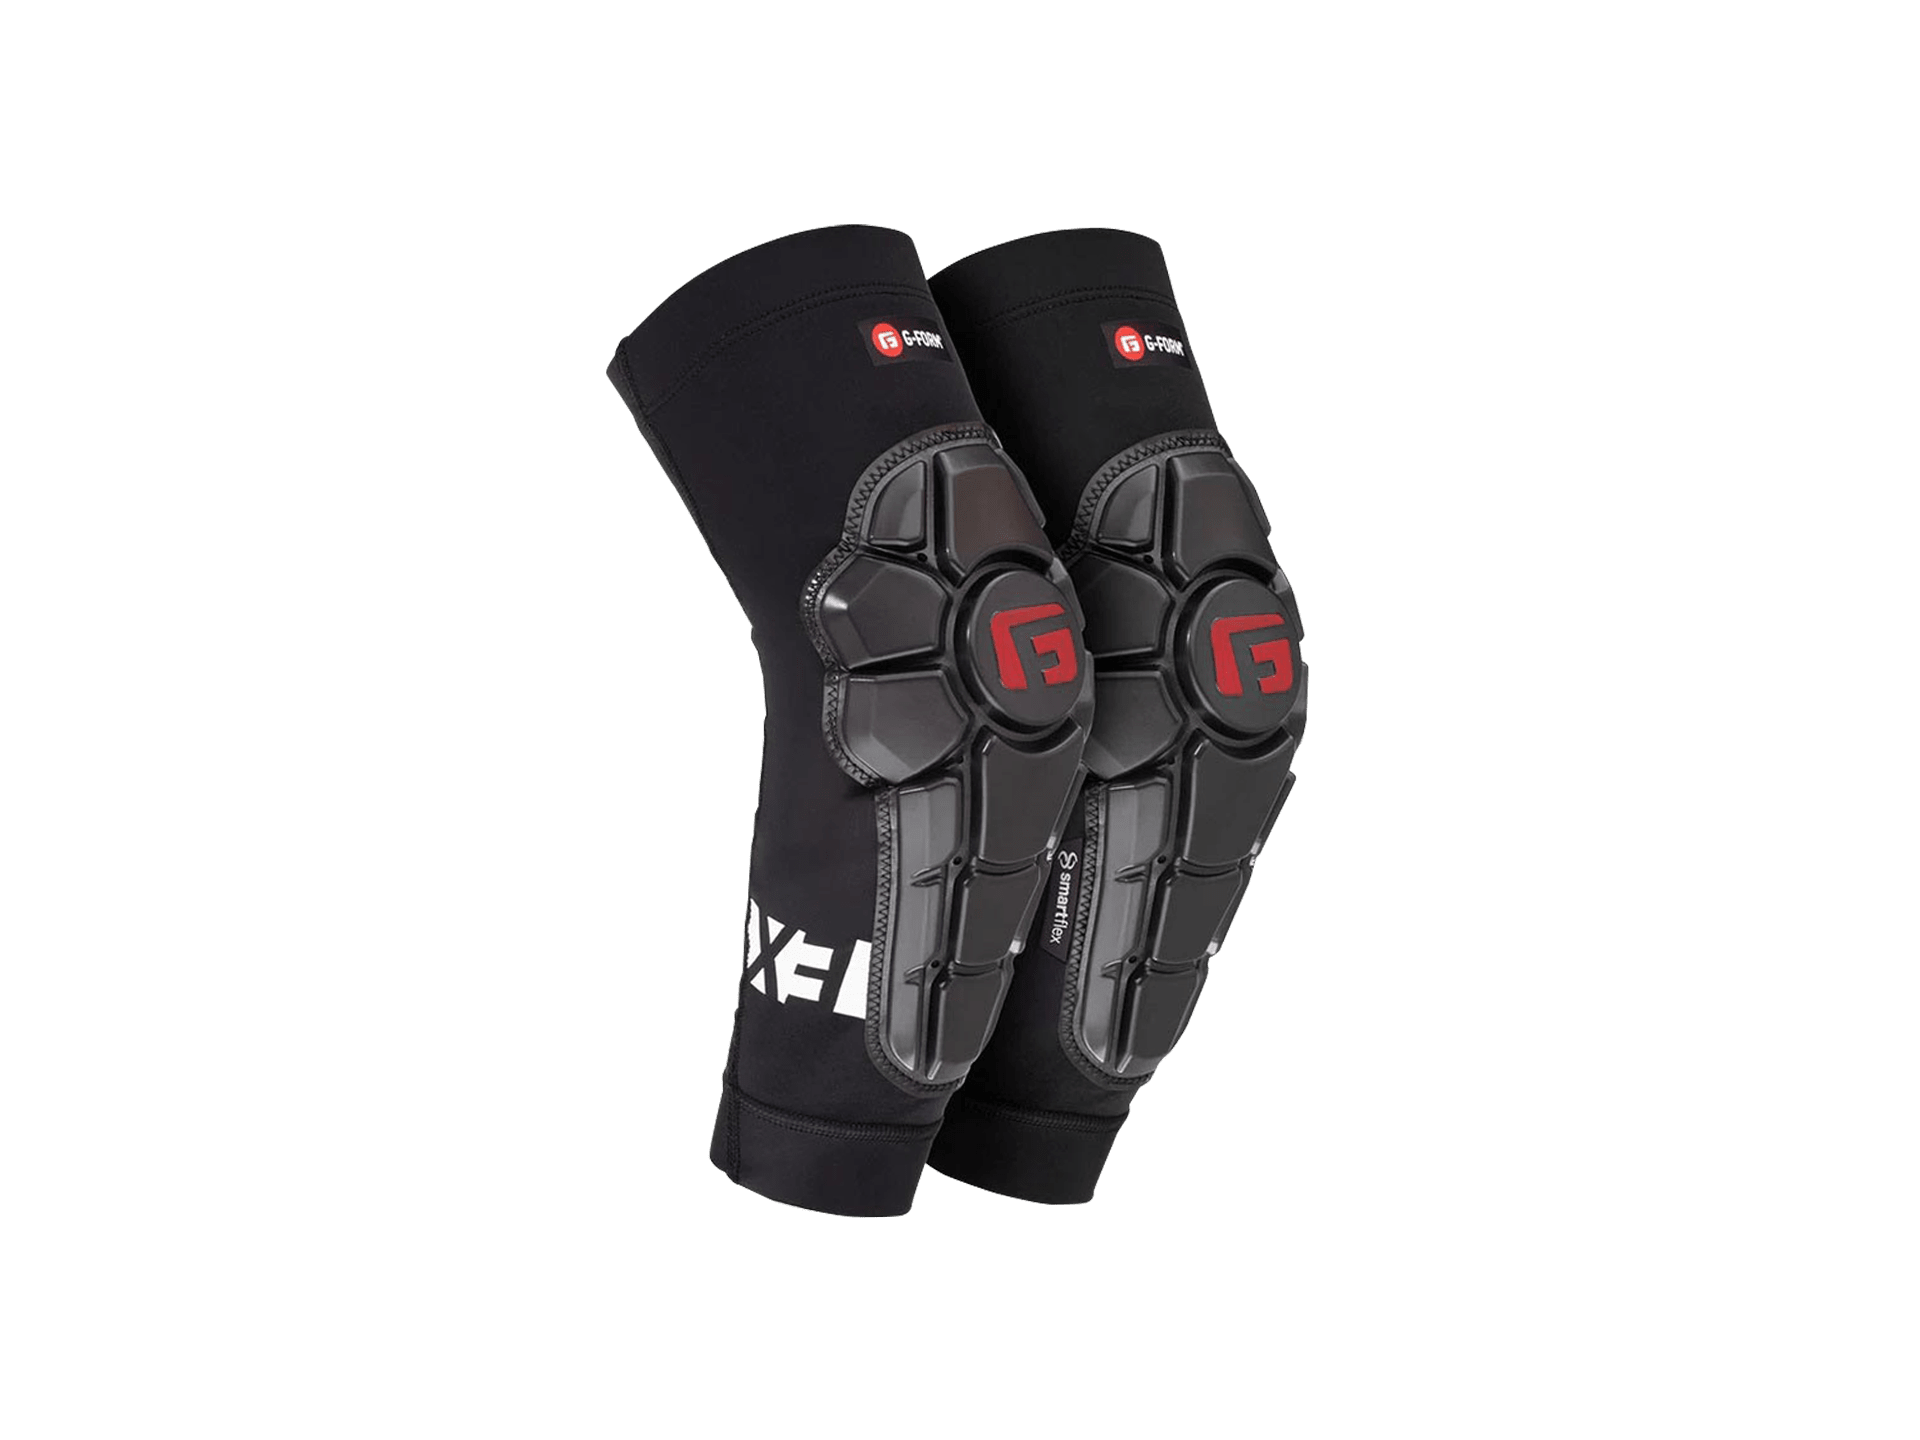 G-Form Pro-X3 Elbow Guards